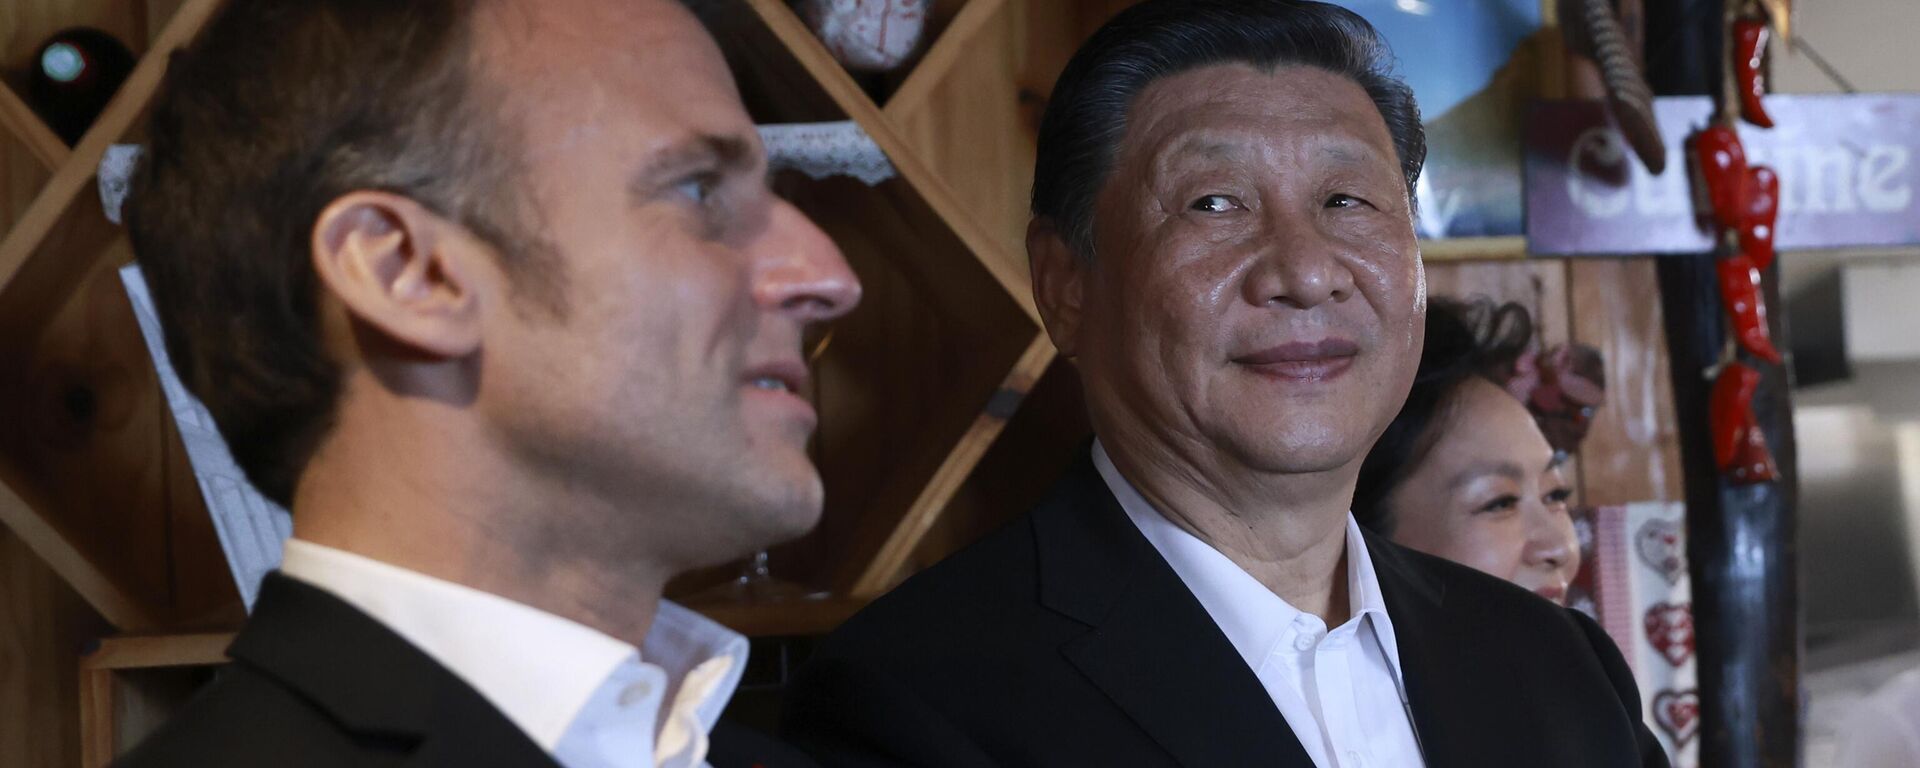 Chinese President Xi Jinping, right, watches French President Emmanuel Macron in a restaurant, Tuesday, May 7, 2024 at the Tourmalet pass, in the Pyrenees mountains. - Sputnik International, 1920, 12.05.2024